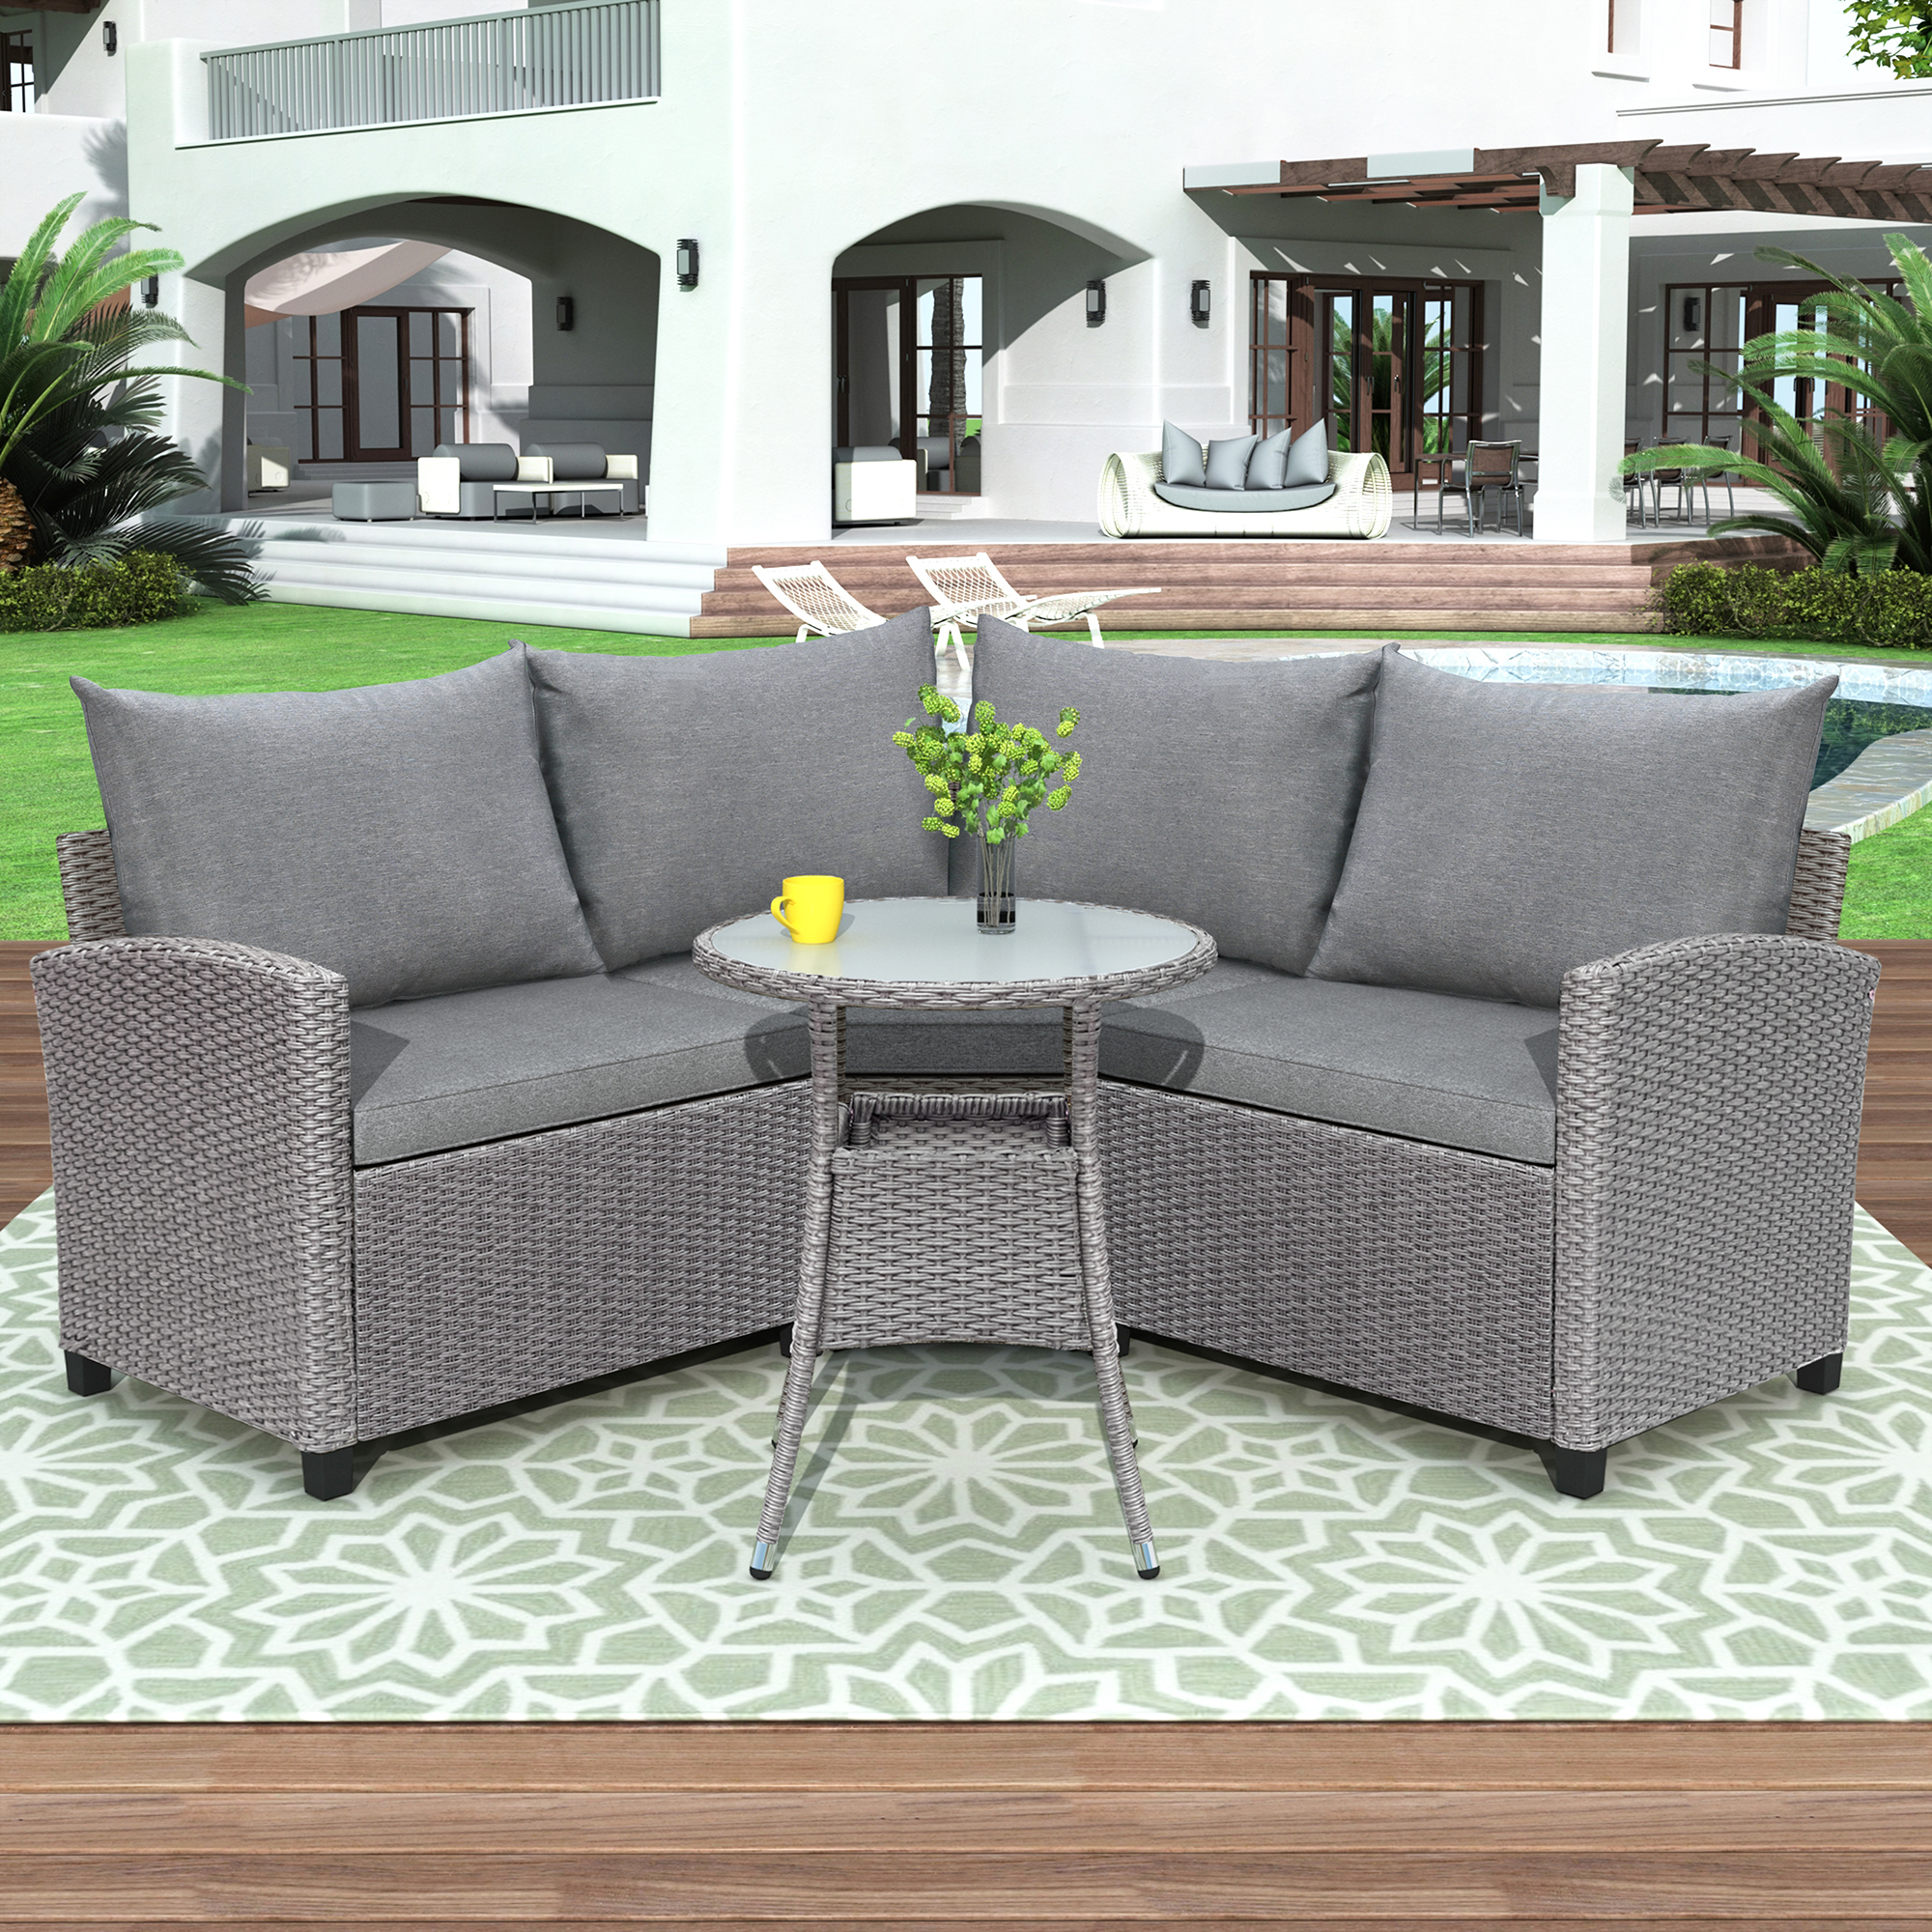 Clearance! Outdoor Bistro Conversation Set, Patio Wicker Sofa Set with Removable Cushions, Modern Outdoor Sectional Sets with Round Glass Coffee Table for Pool Garden Backyard, 650lbs, Gray, S1998 - image 1 of 9